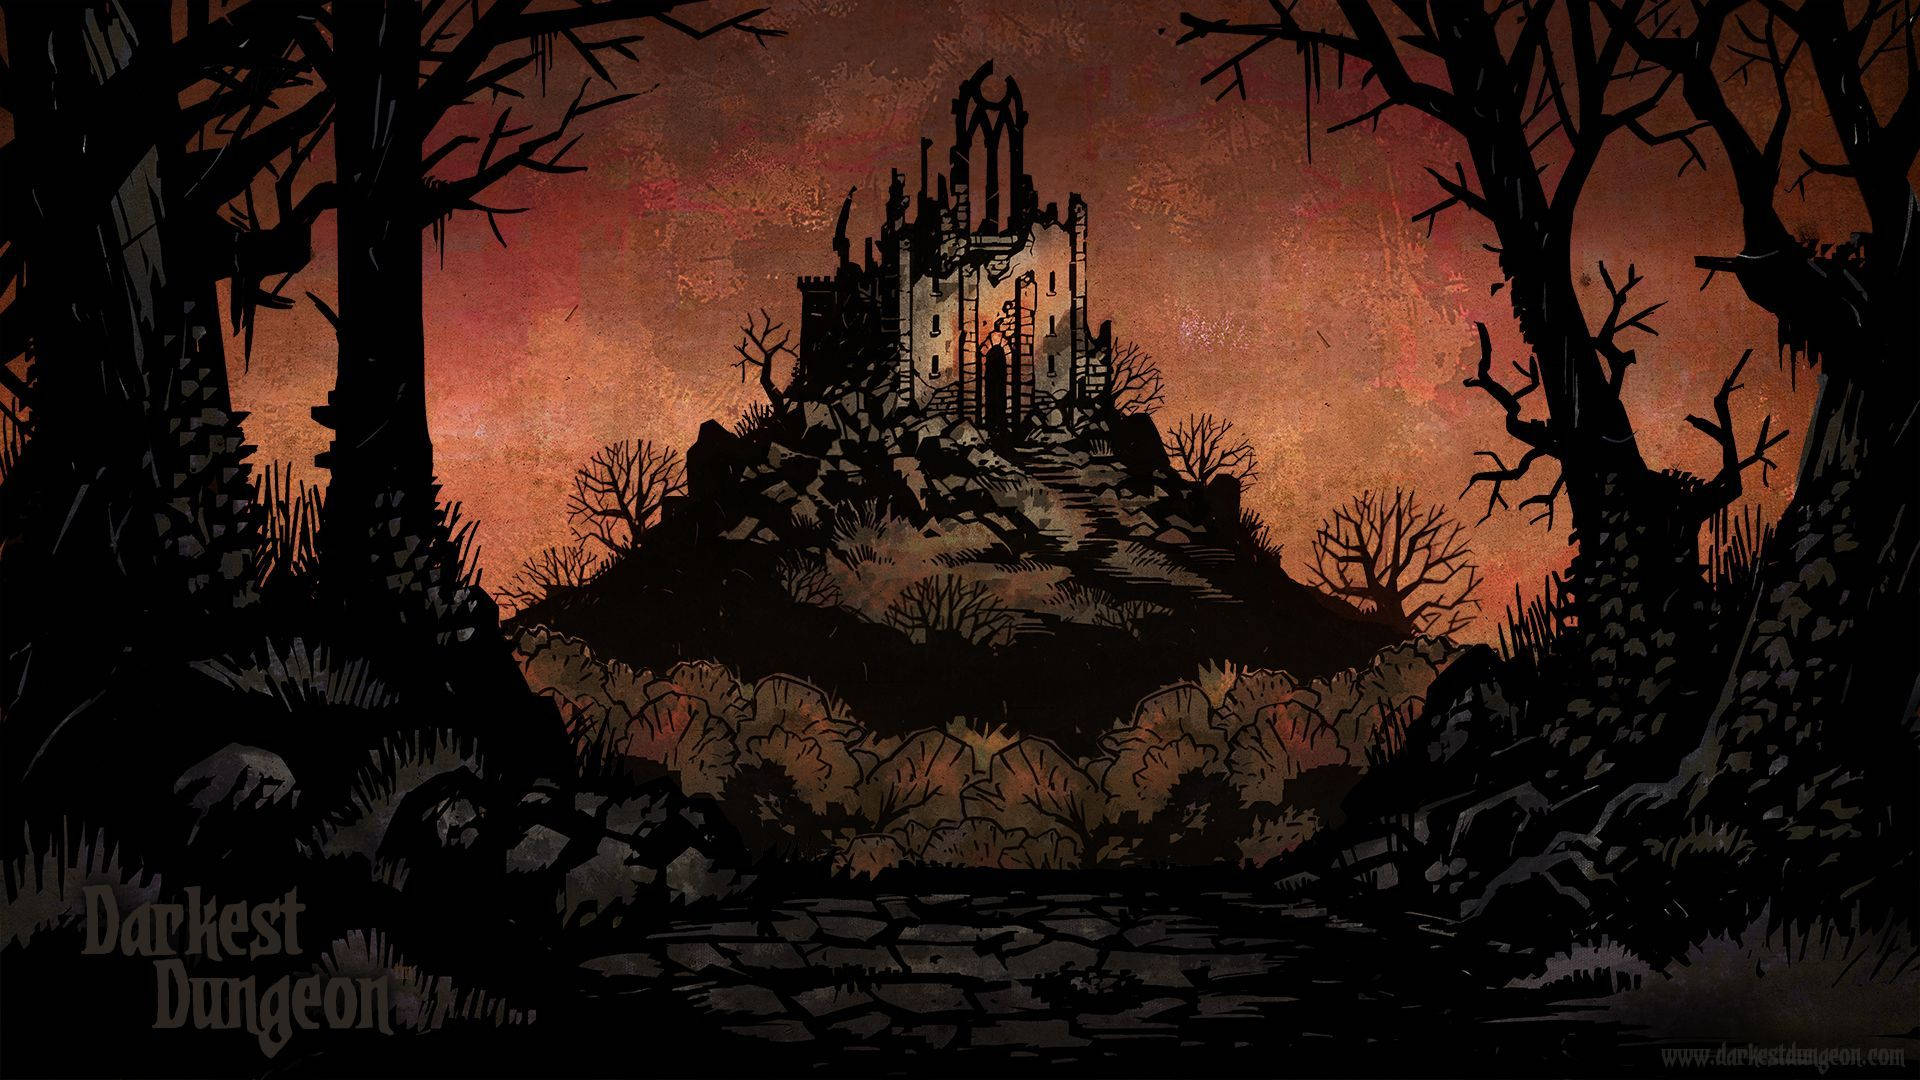 Defeat the terrors of Darkest Dungeon with courage and strength Wallpaper